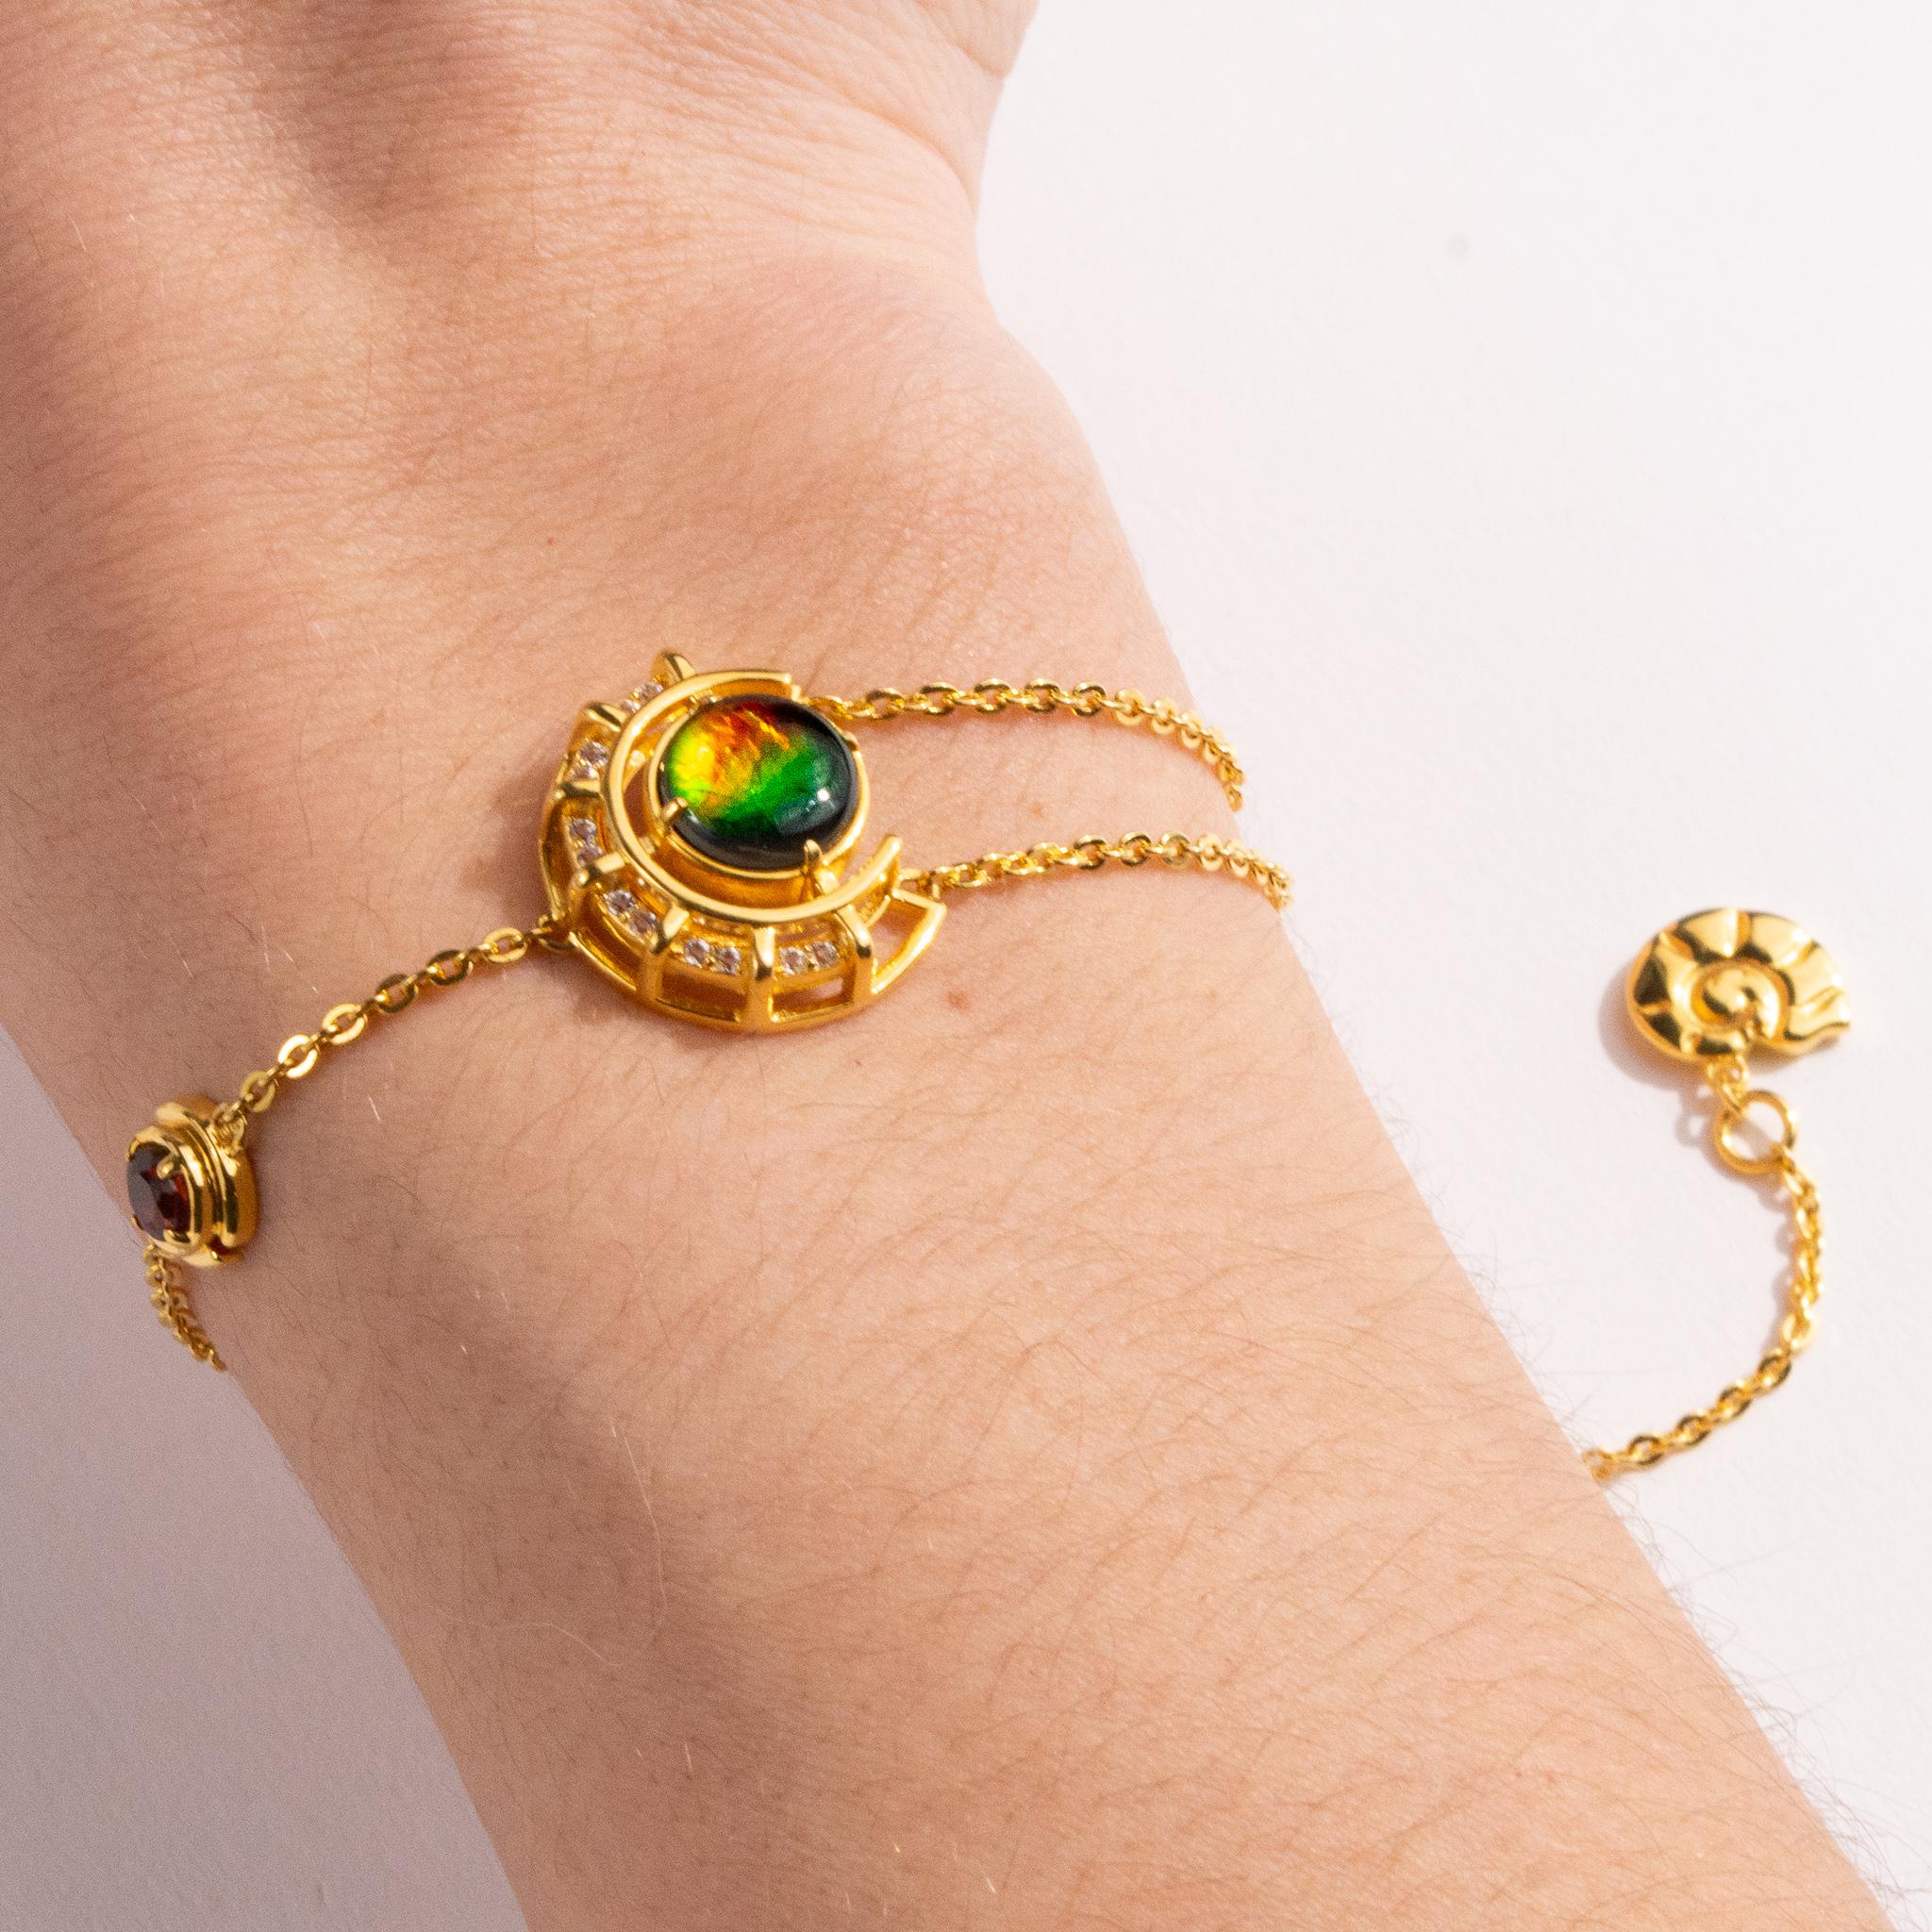 Product Details:

The Prosperity Collection celebrating the Chinese new year was inspired by the Chinese symbol for prosperity, bringing good fortune to all who wear it.

Unfaceted A grade Ammolite
8mm Round Ammolite Bracelet
18K gold